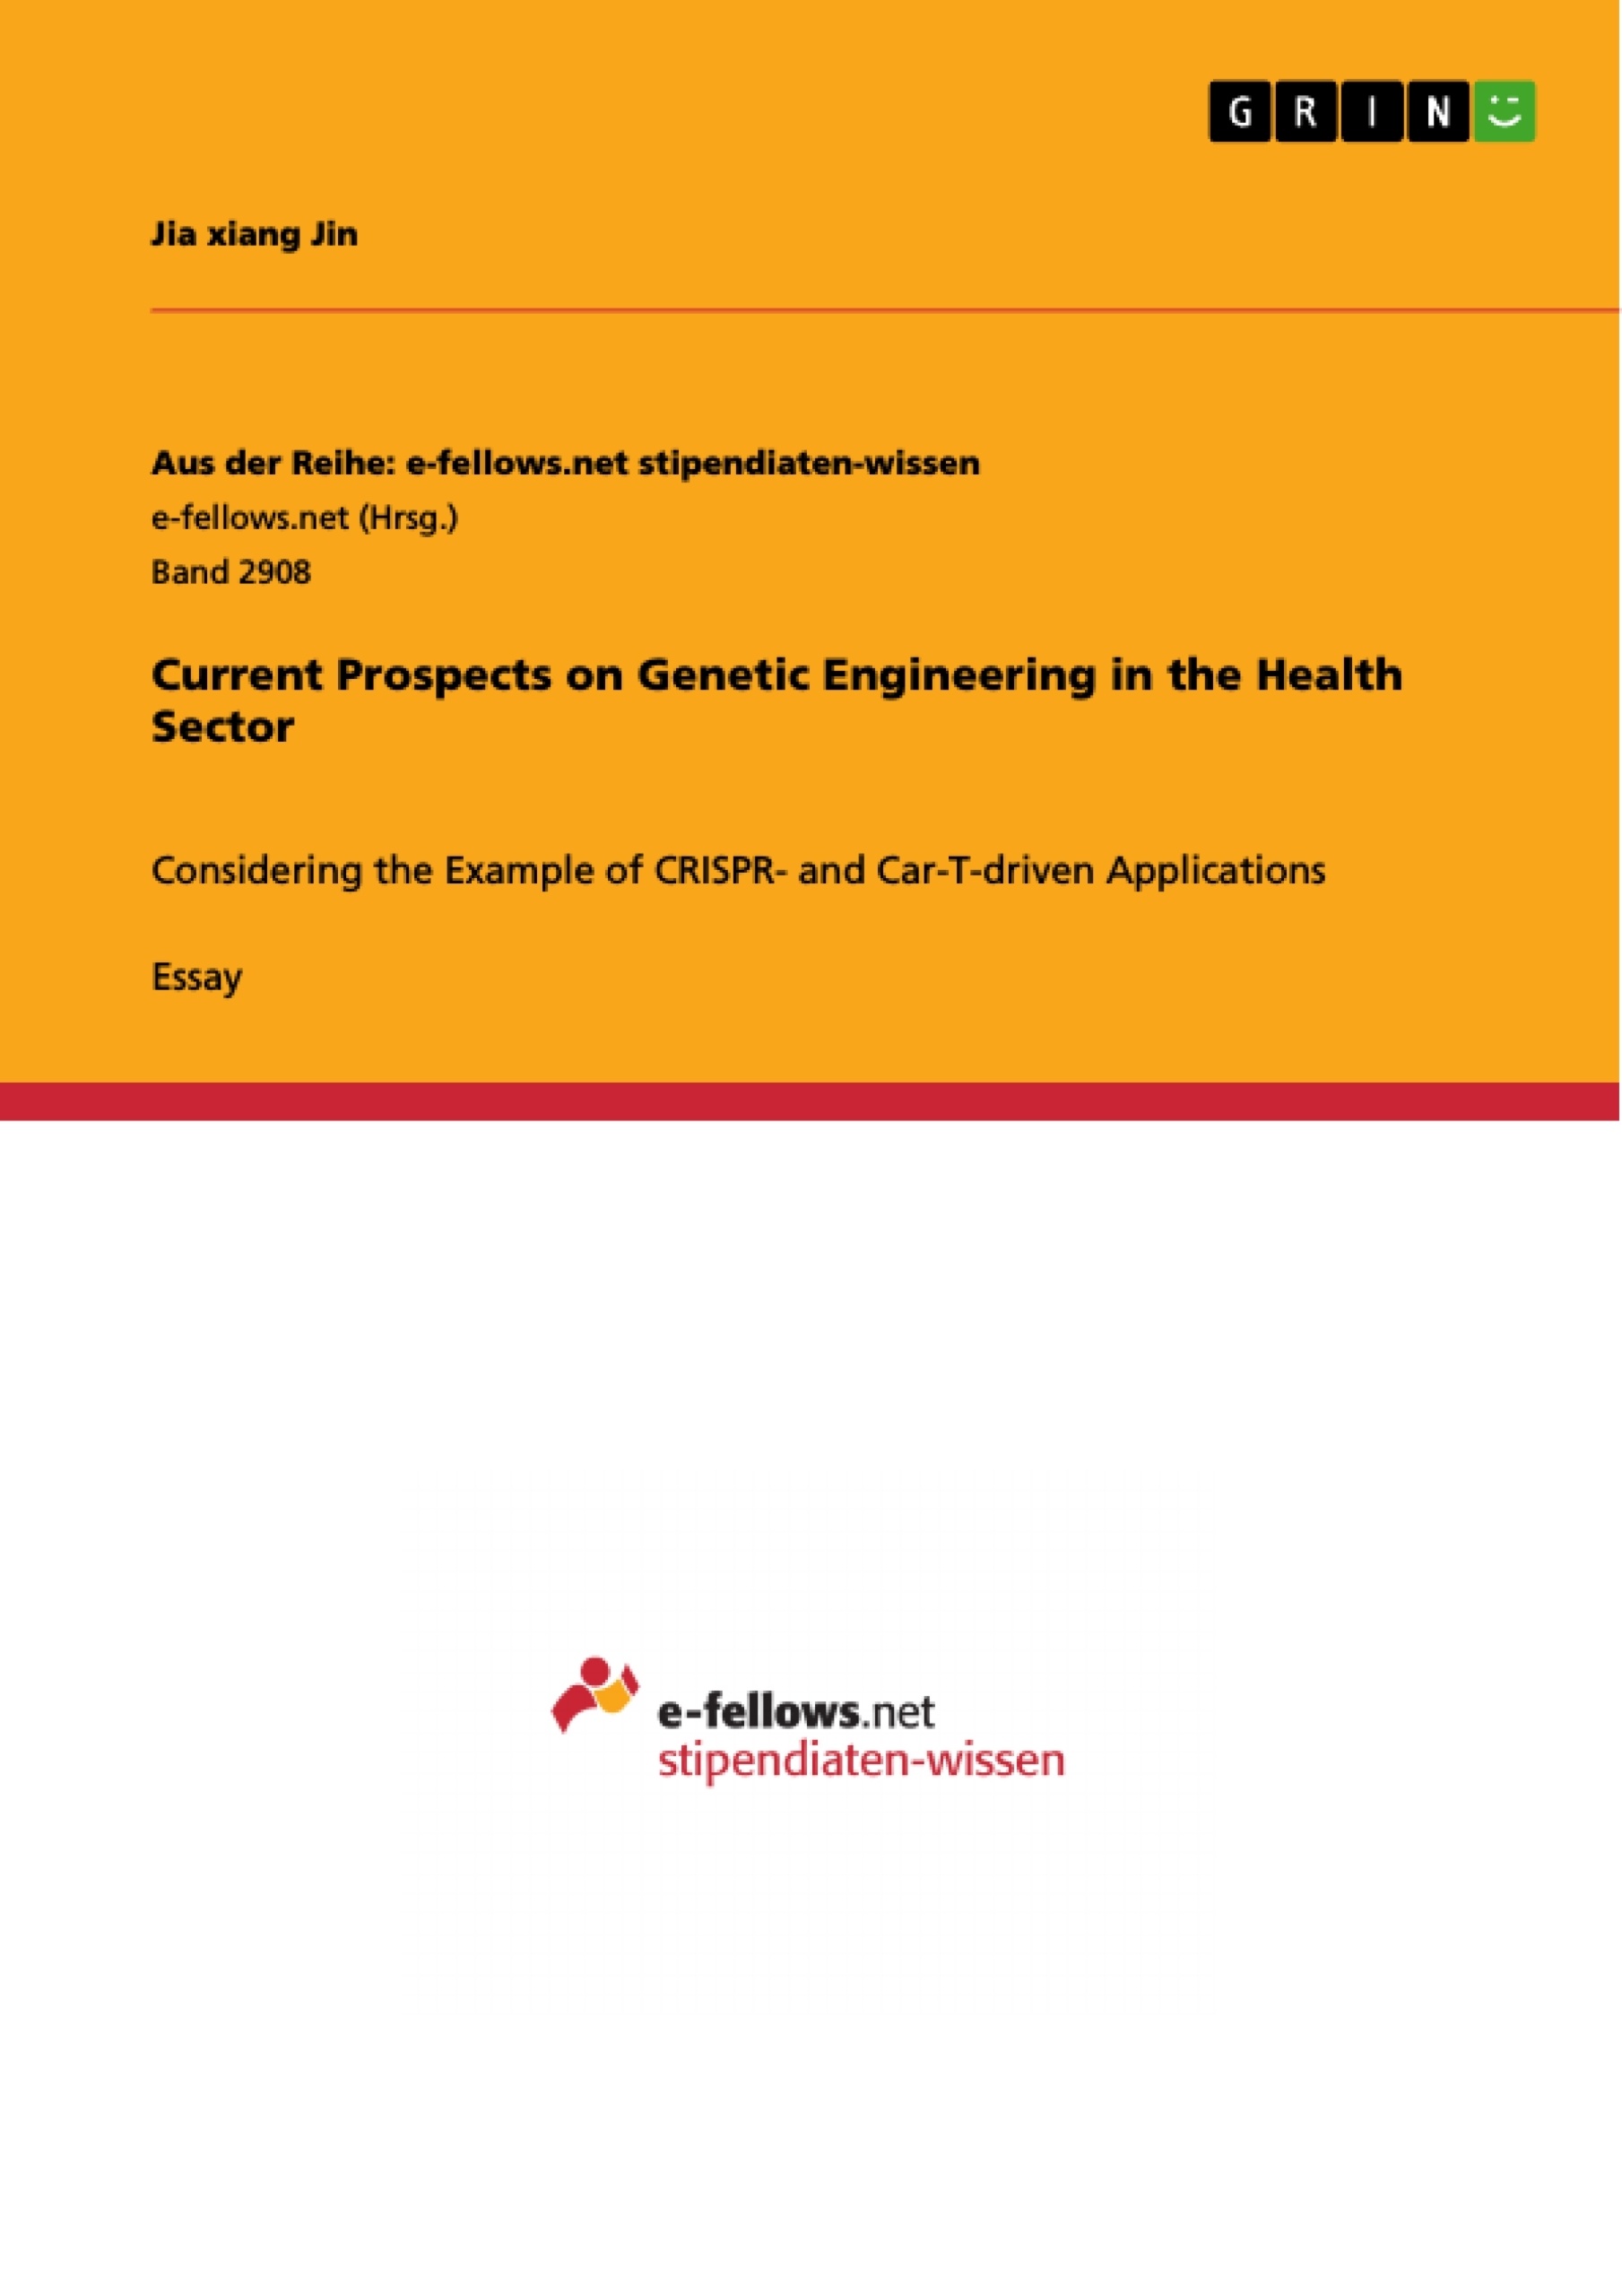 Title: Current Prospects on Genetic Engineering in the Health Sector